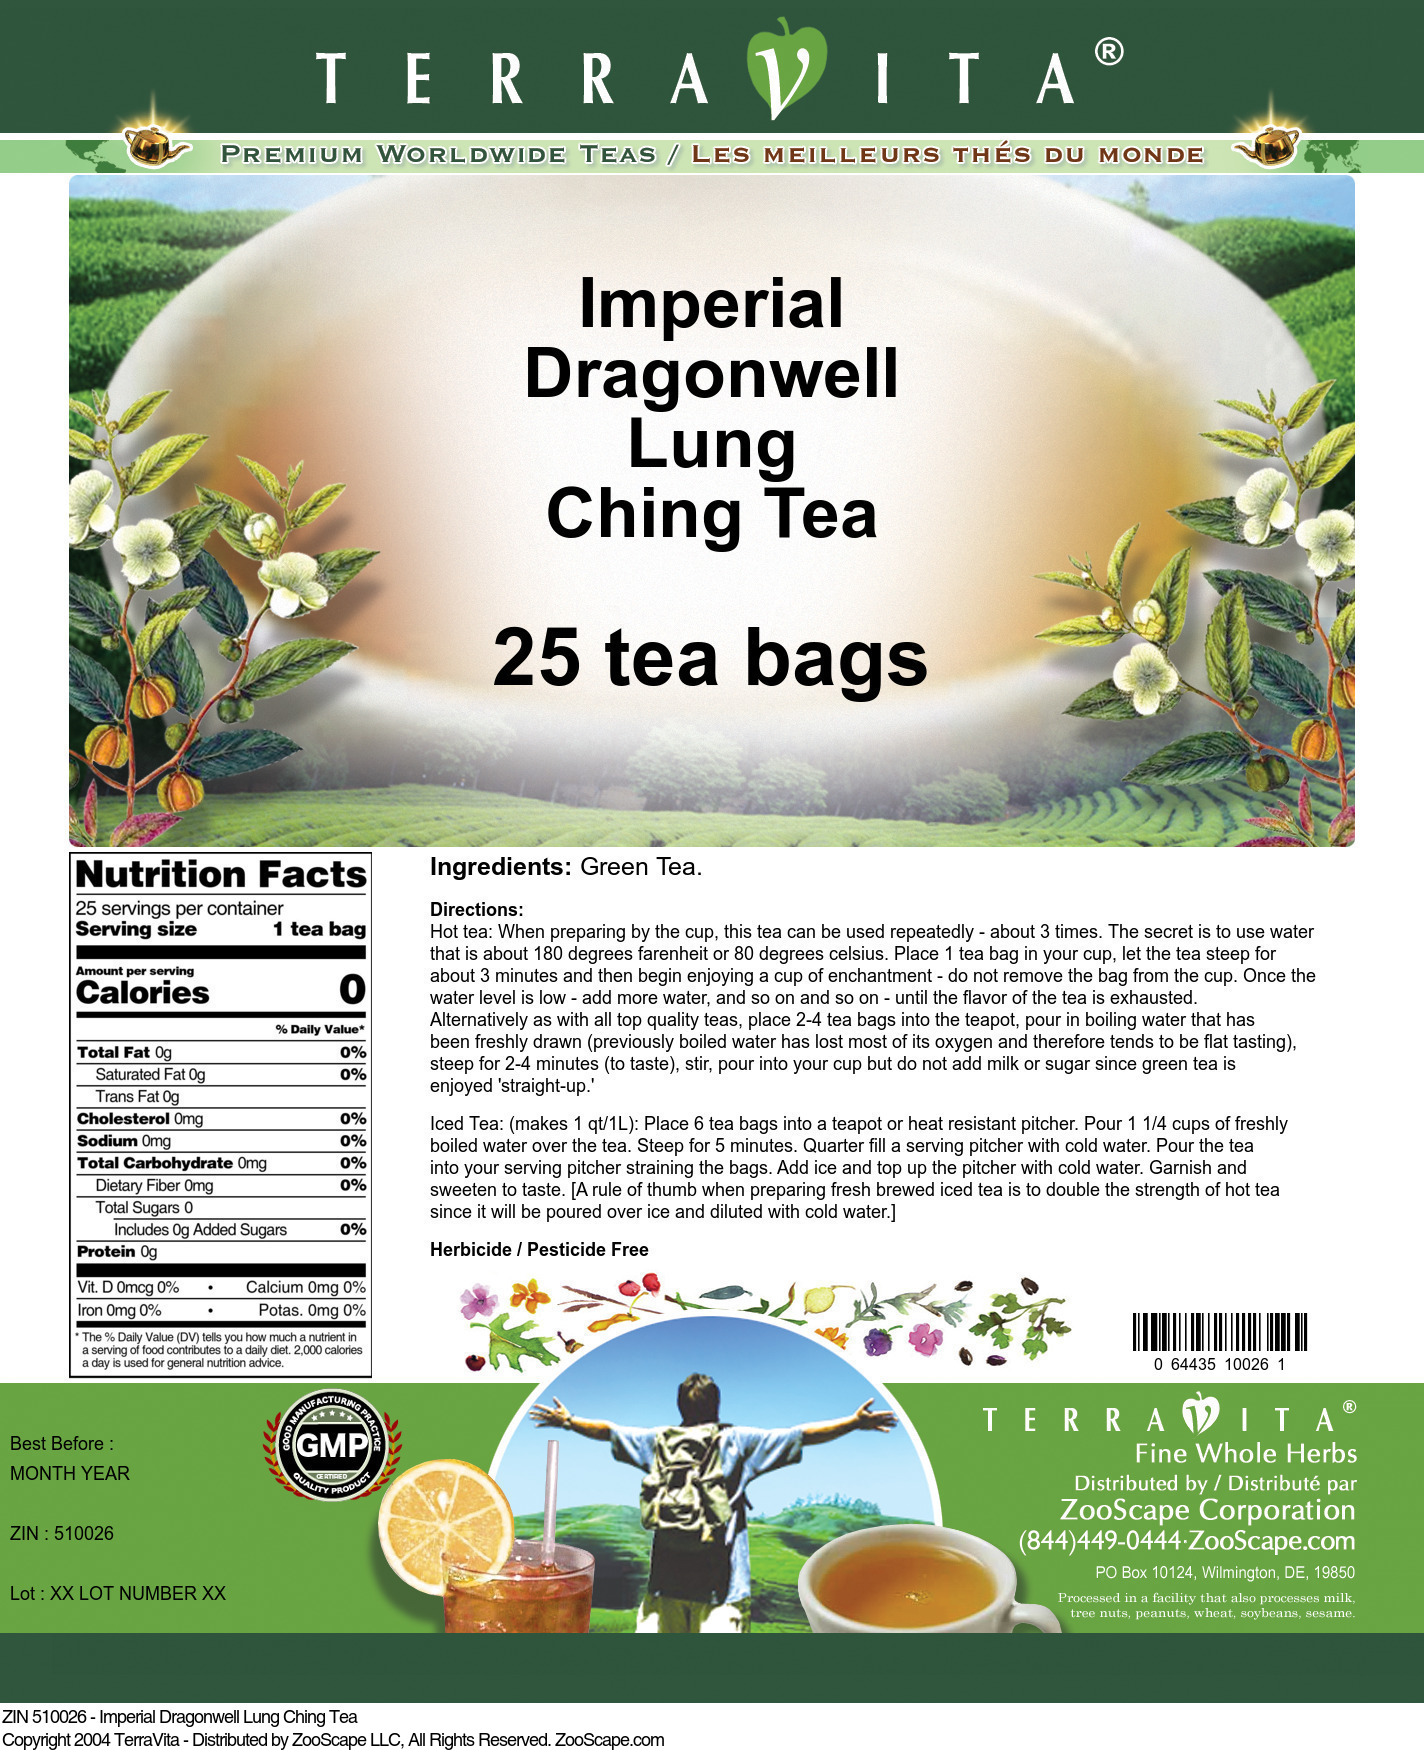 Imperial Dragonwell Lung Ching Tea - Label